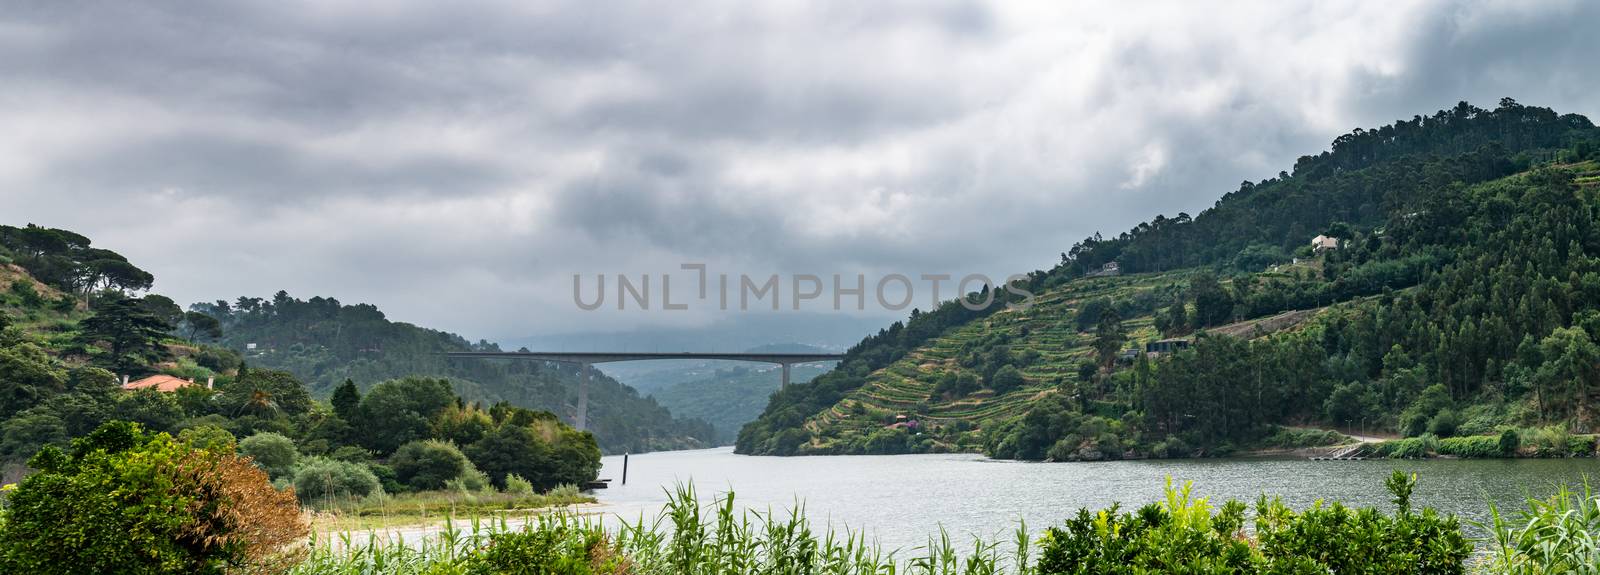 View of Douro Valley, Portugal.  by homydesign